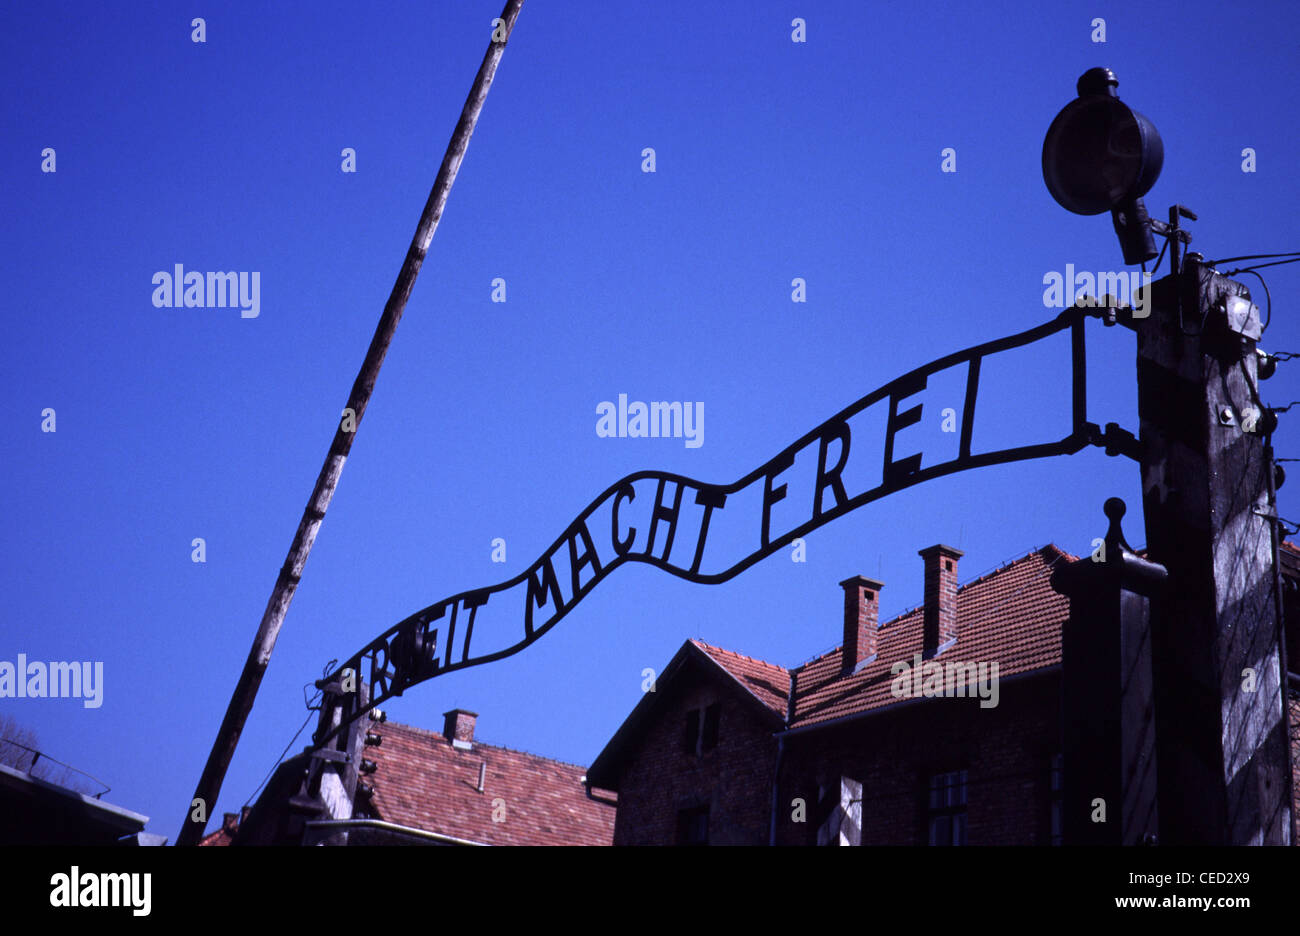 'Arbeit macht frei' sign in German language over the main gate entrance to Auschwitz concentration and extermination camp built and operated by the Third Reich in Polish areas annexed by Nazi Germany during World War II Stock Photo